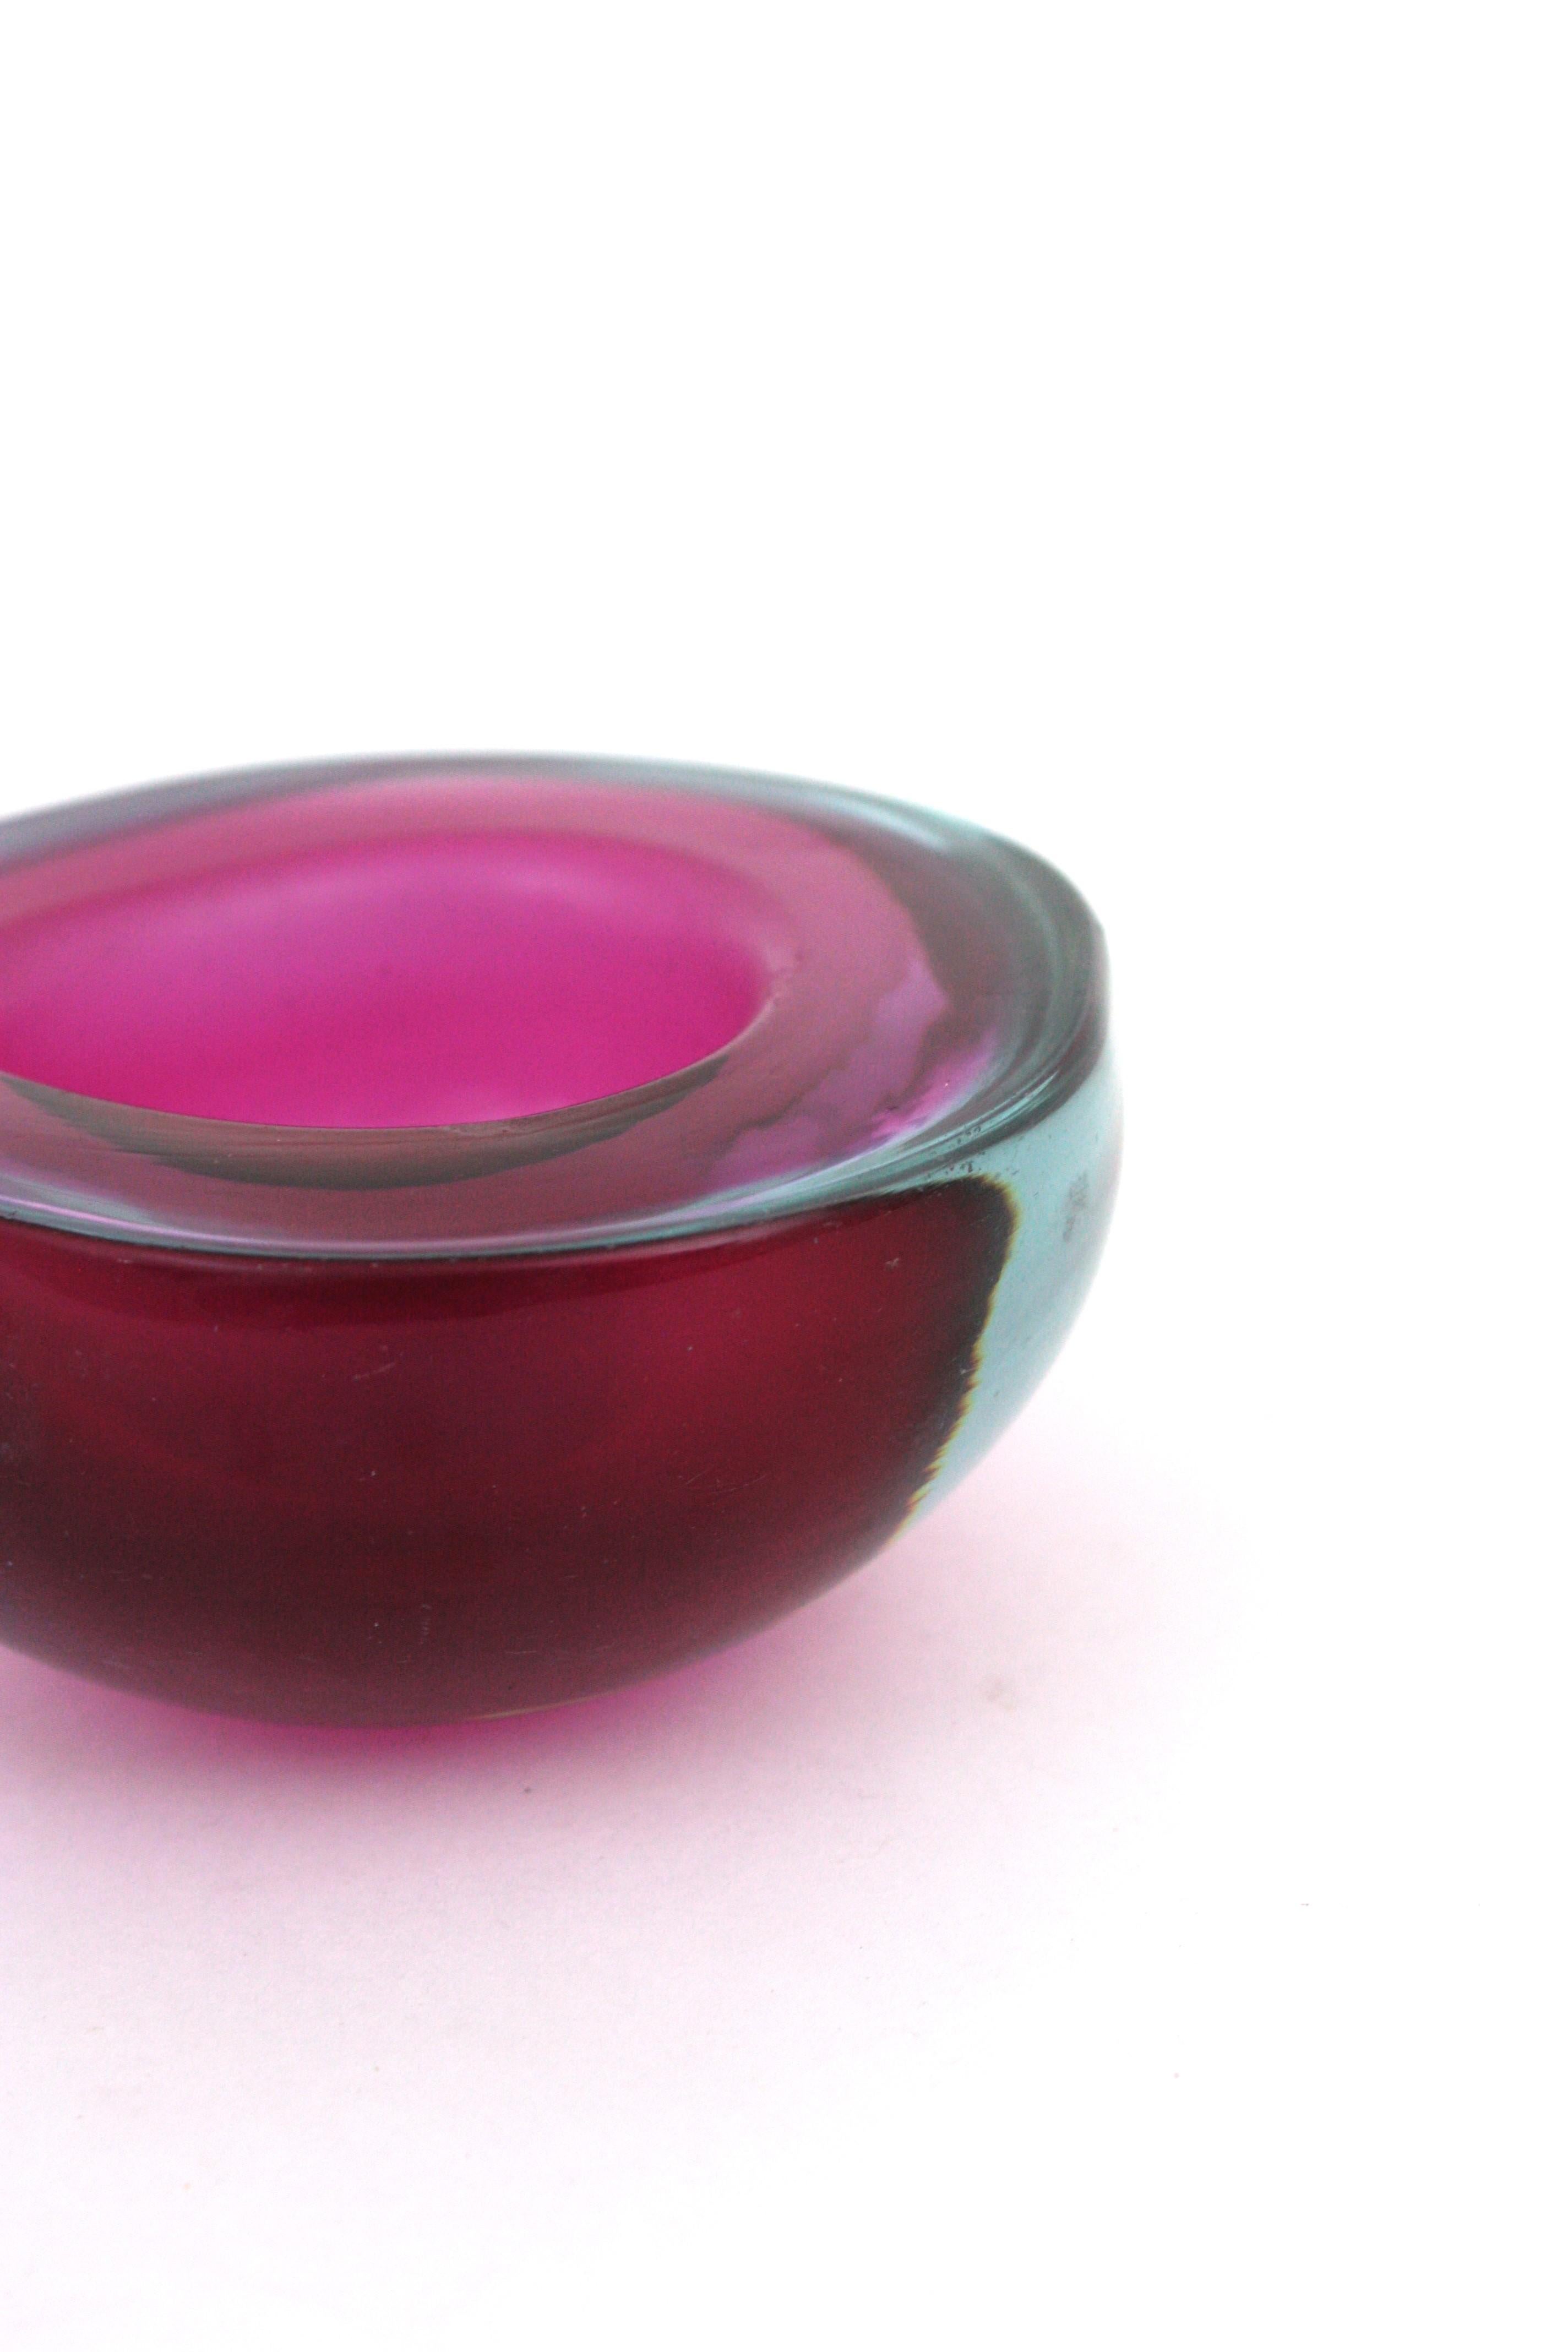 Seguso Murano Sommerso Pink Fuchsia Glass Geode Triangle Art Glass Bowl For Sale 4